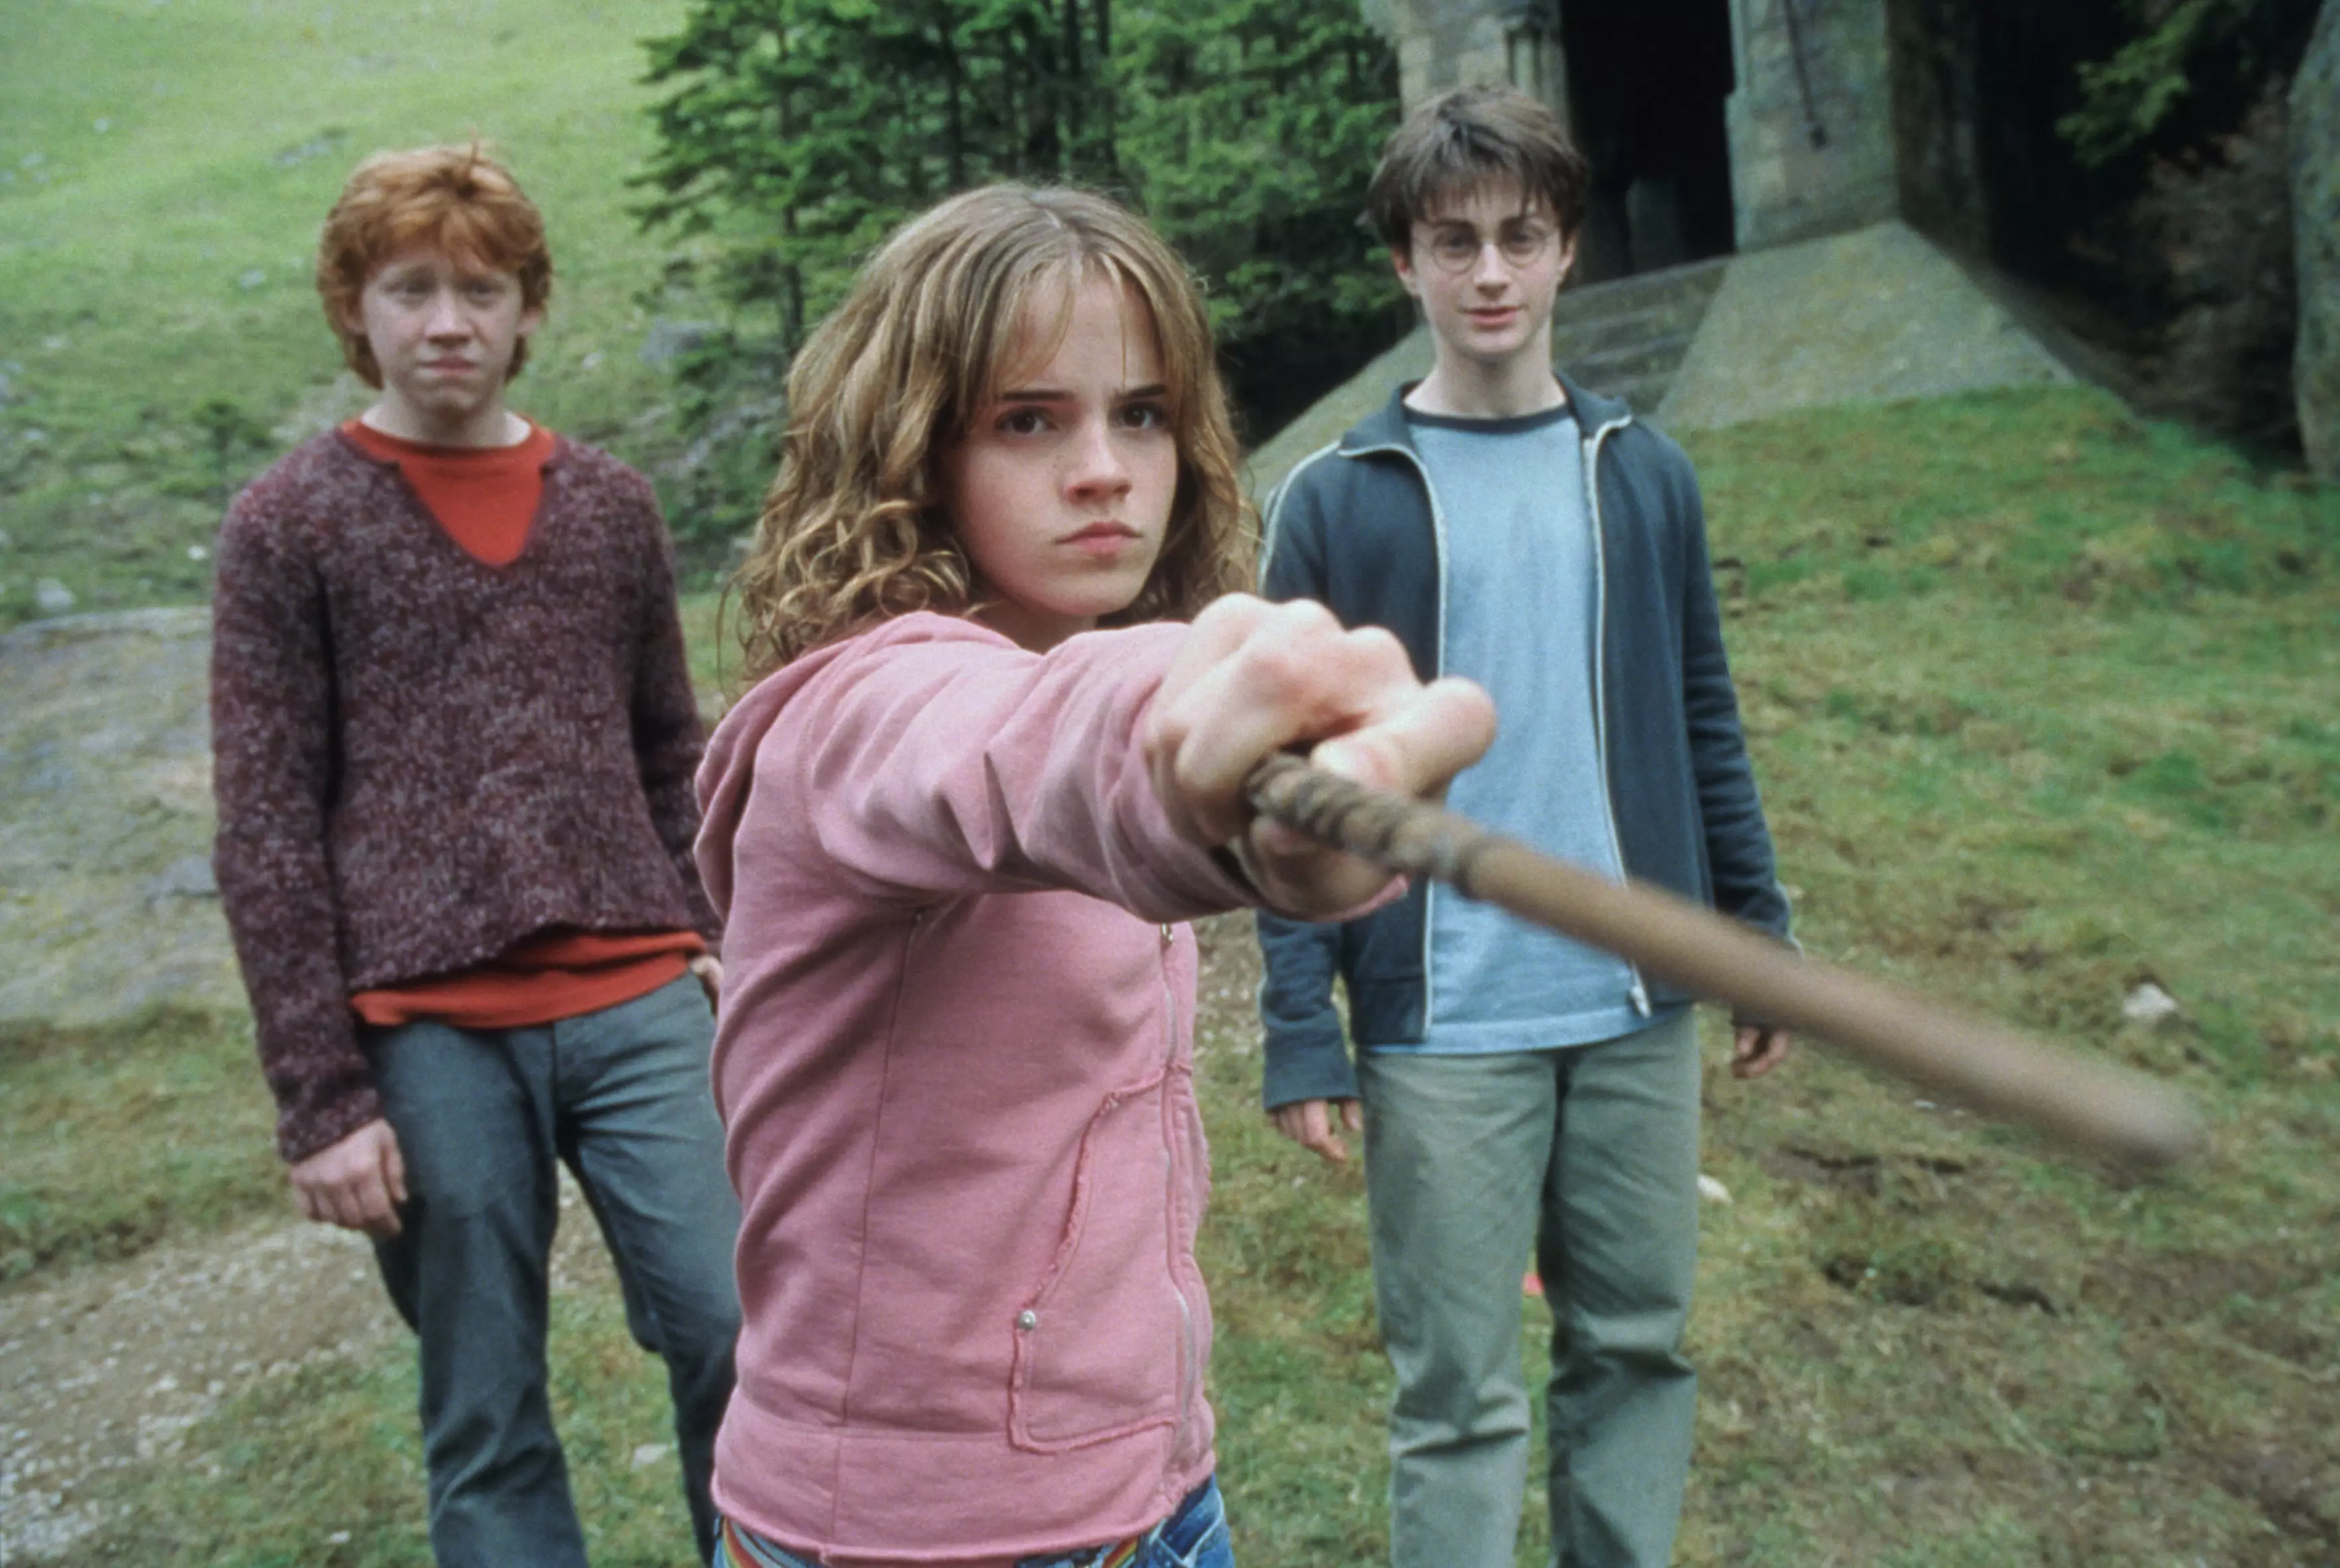 Hermione stands up to Draco Malfoy (